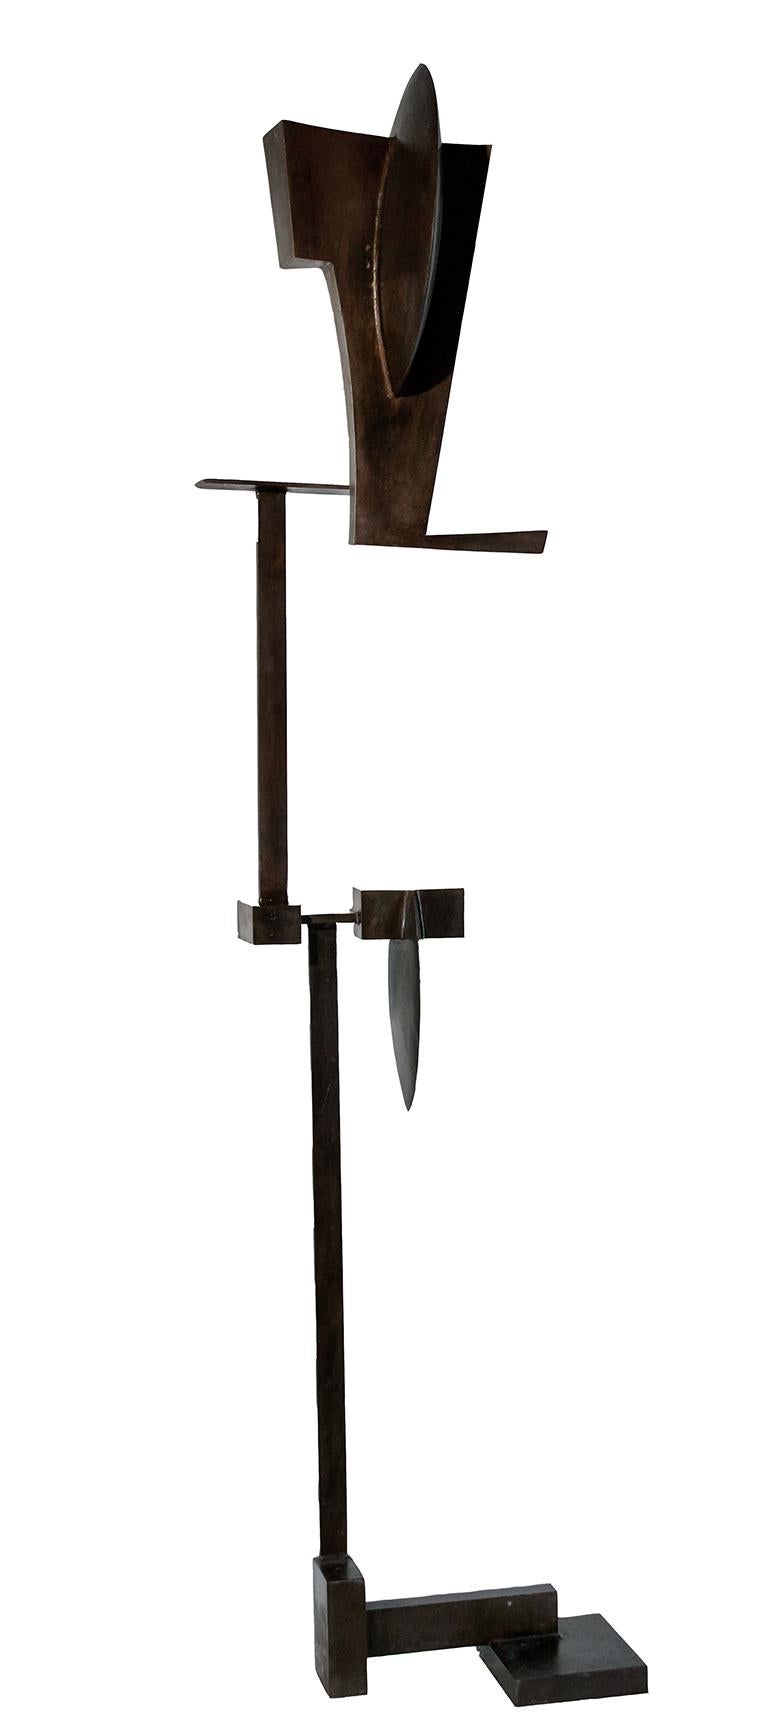 Minimalist, abstract geometric standing sculpture in dark brown oxidized steel
"Some Guy #2" by Joe Wheaton, made in 2005
oxidized steel, 80 x 17.5 x 15 inches
Freestanding sculpture with stable base
Artist signature and date is located on the base